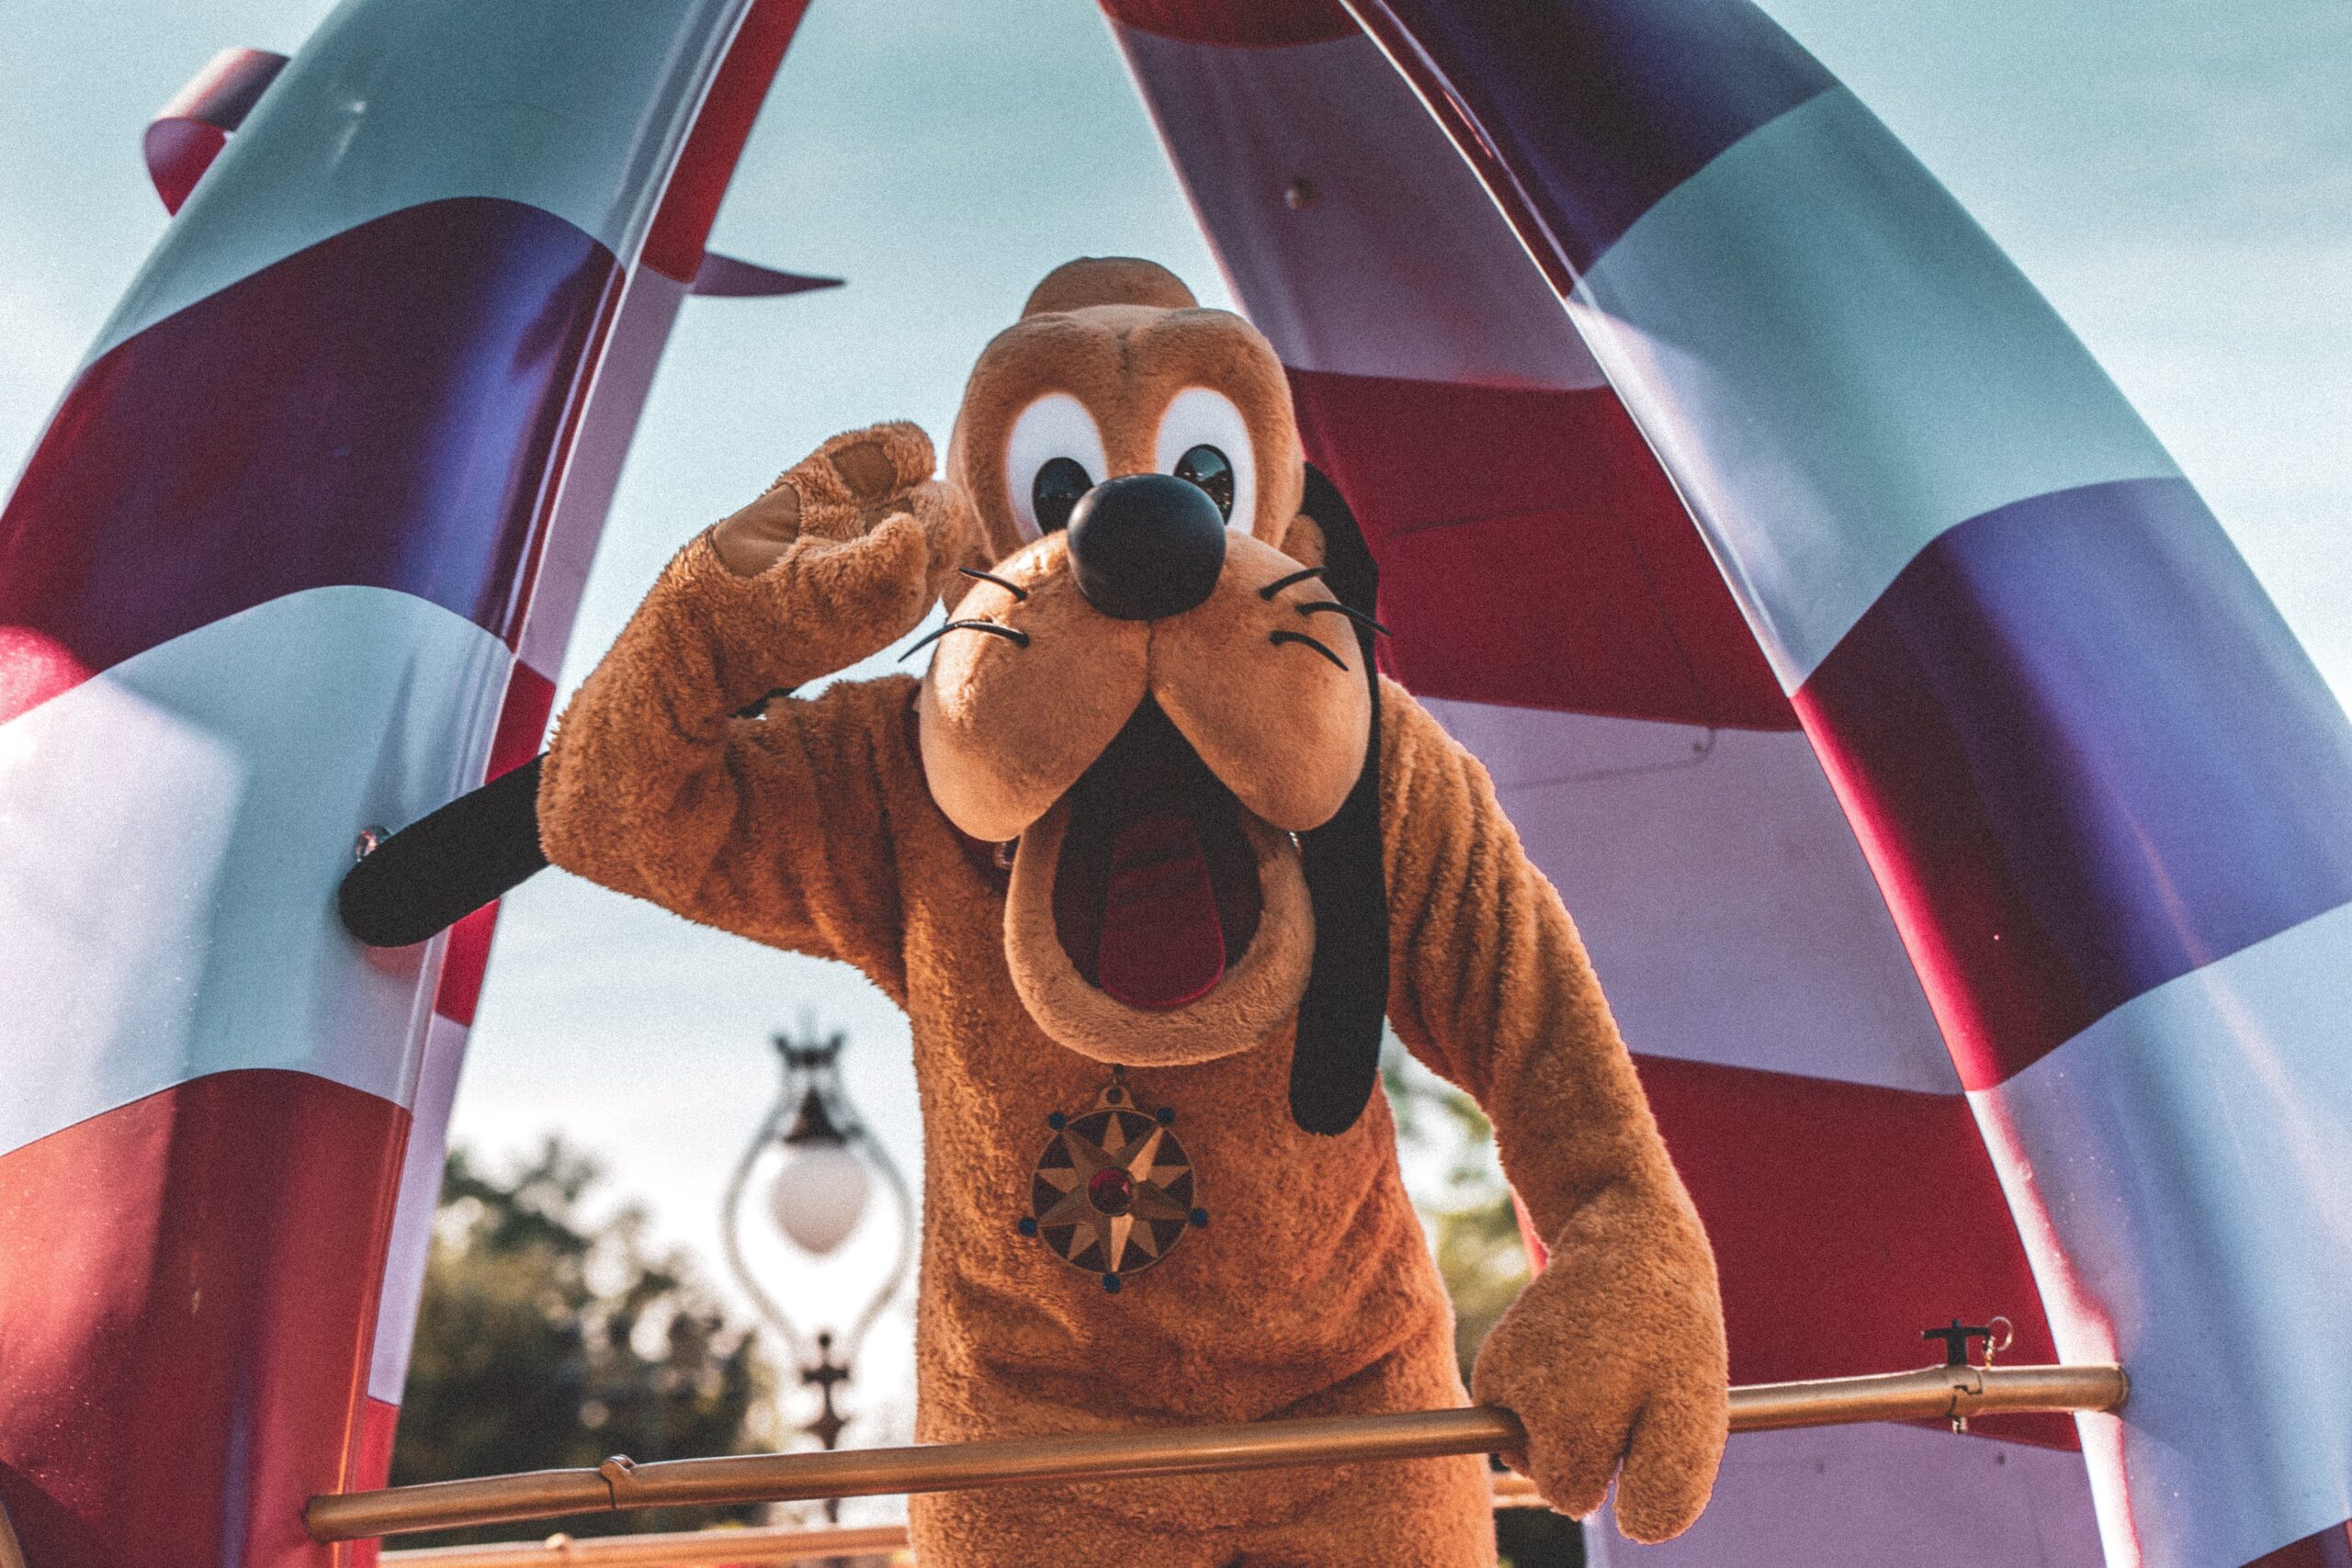 Goofy and other characters can often be seen at Boardwalk 